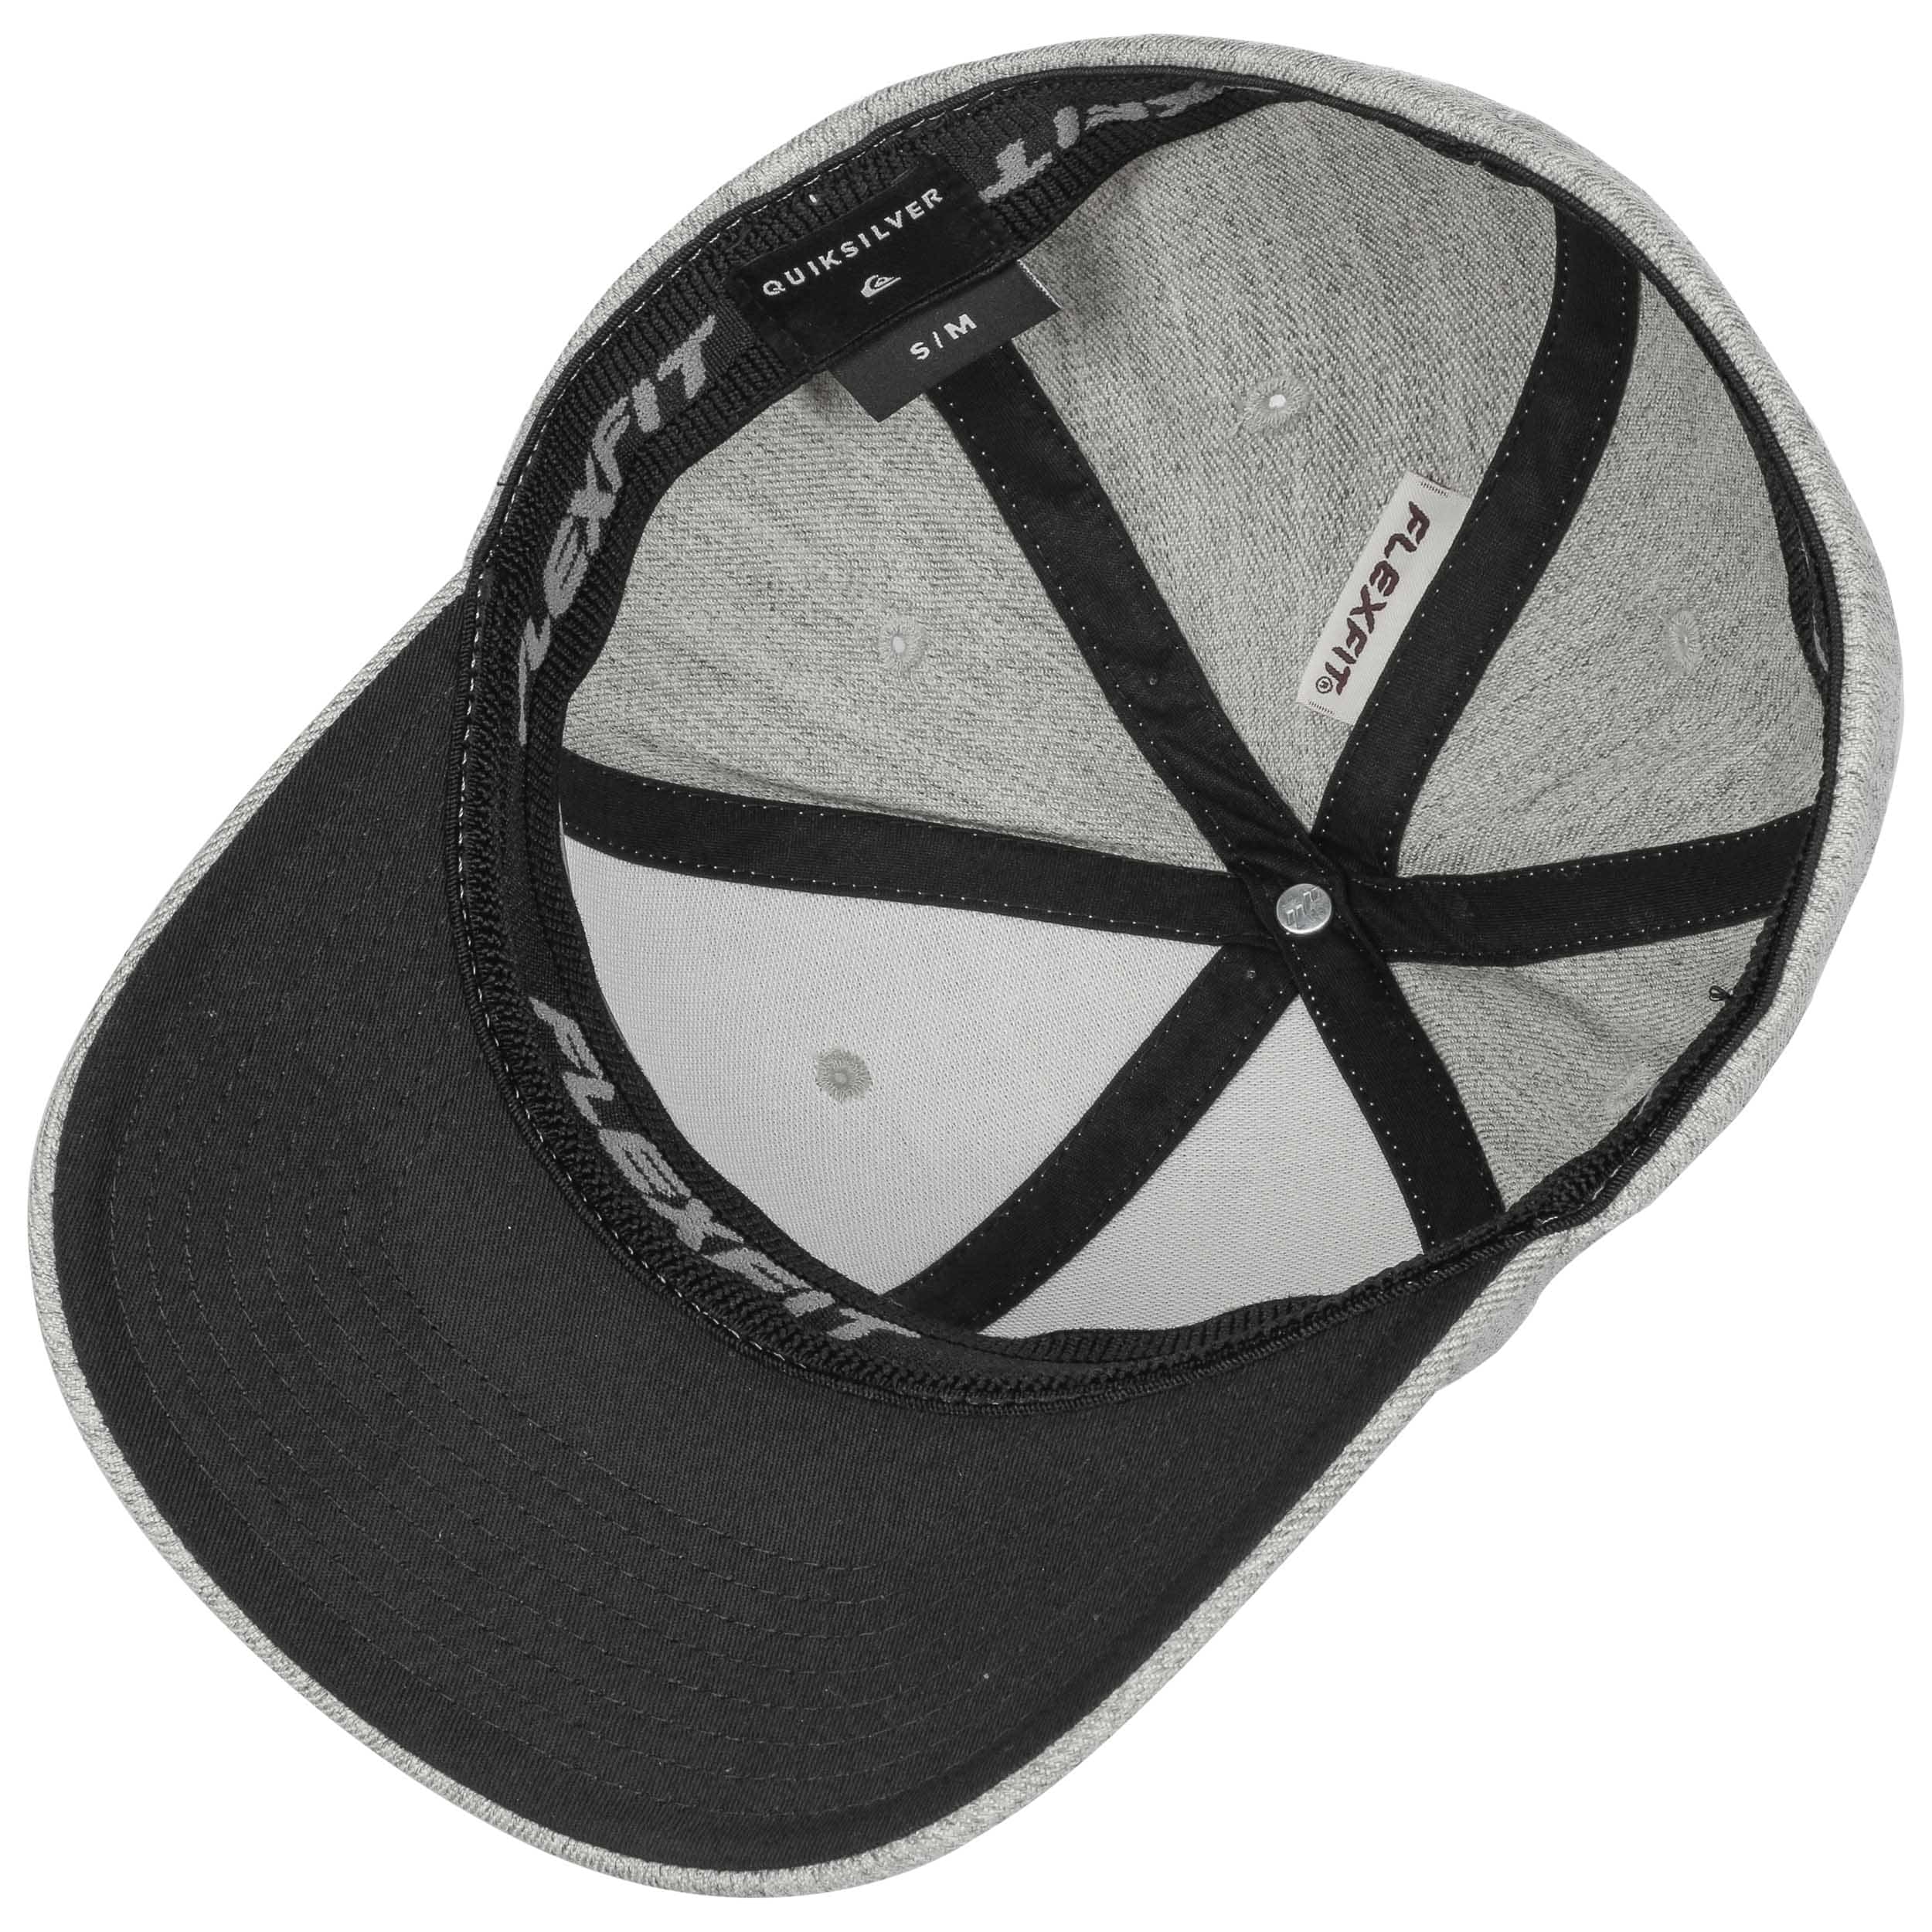 Mountain & Wave Fitted Cap by Quiksilver